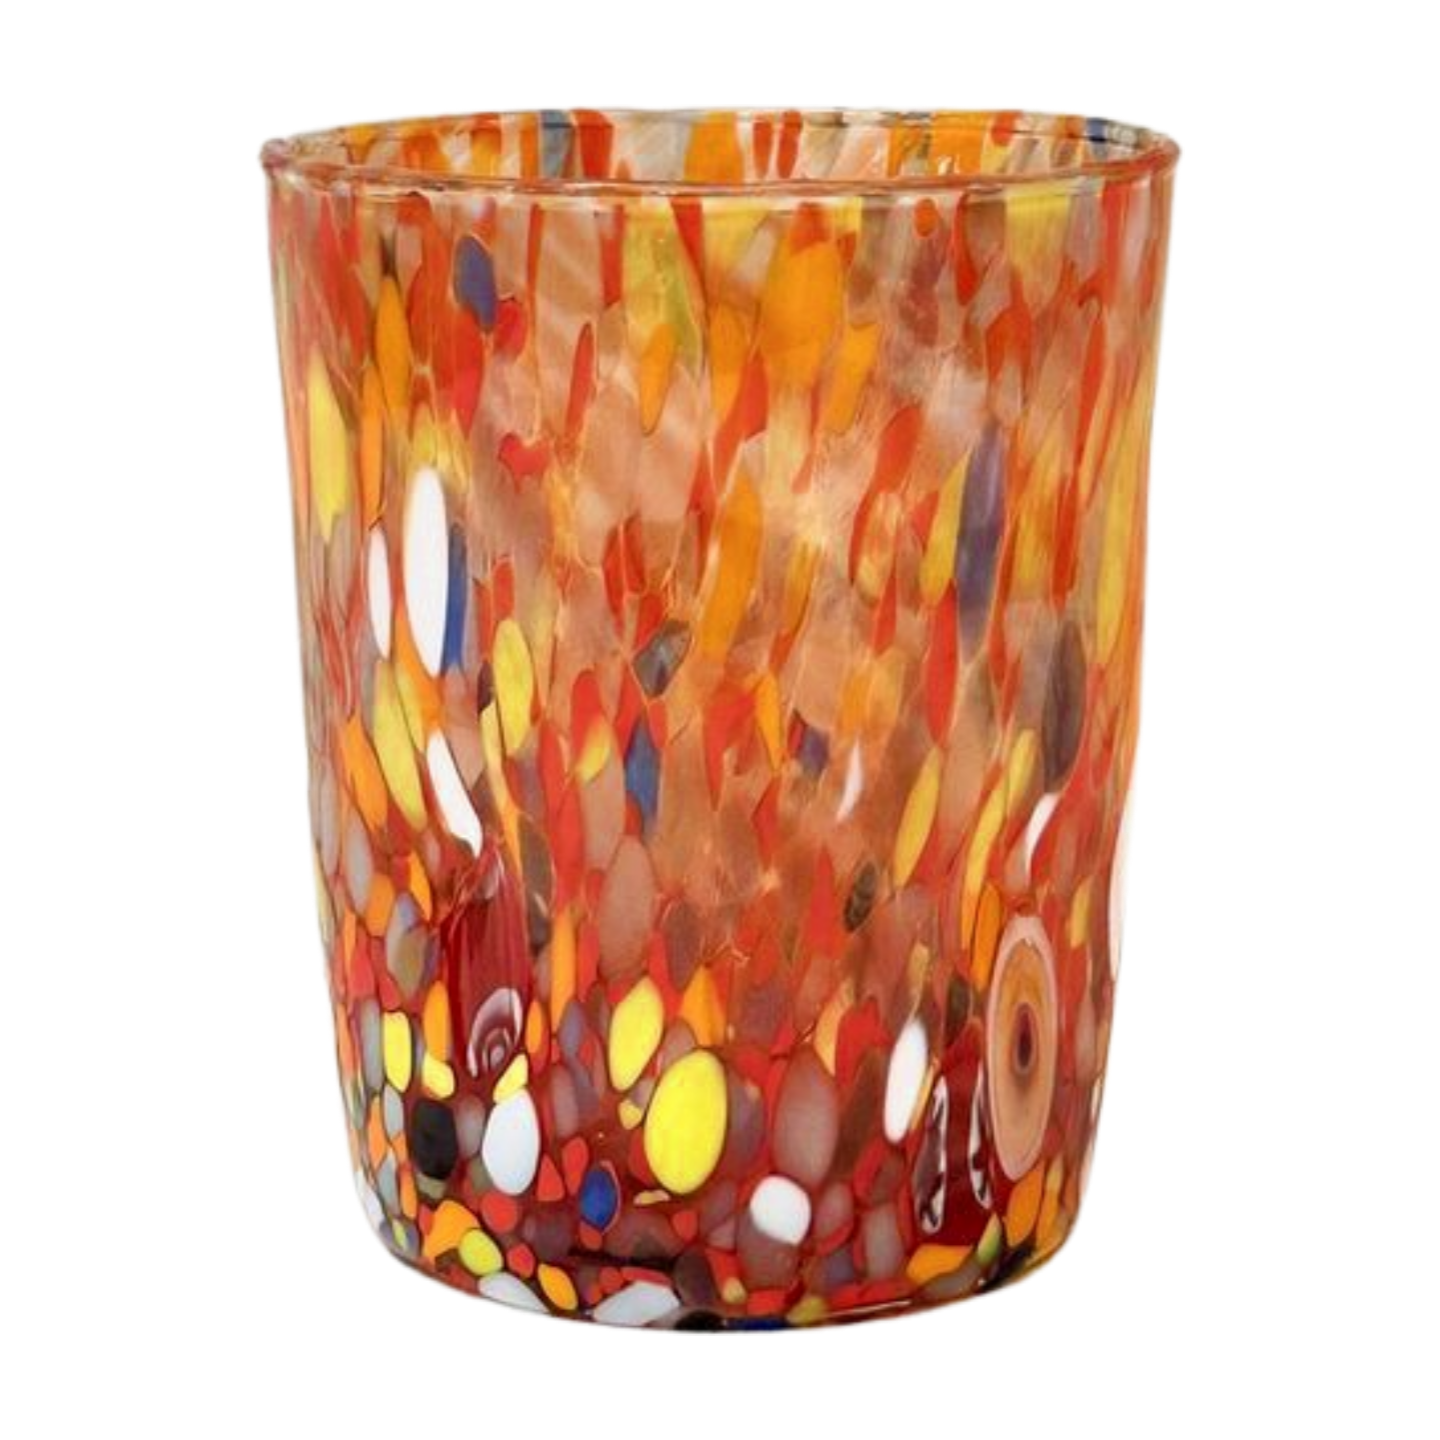 Murano glass tumbler featuring a red design. Heavy and durable, this glass is perfect for serving any beverage.